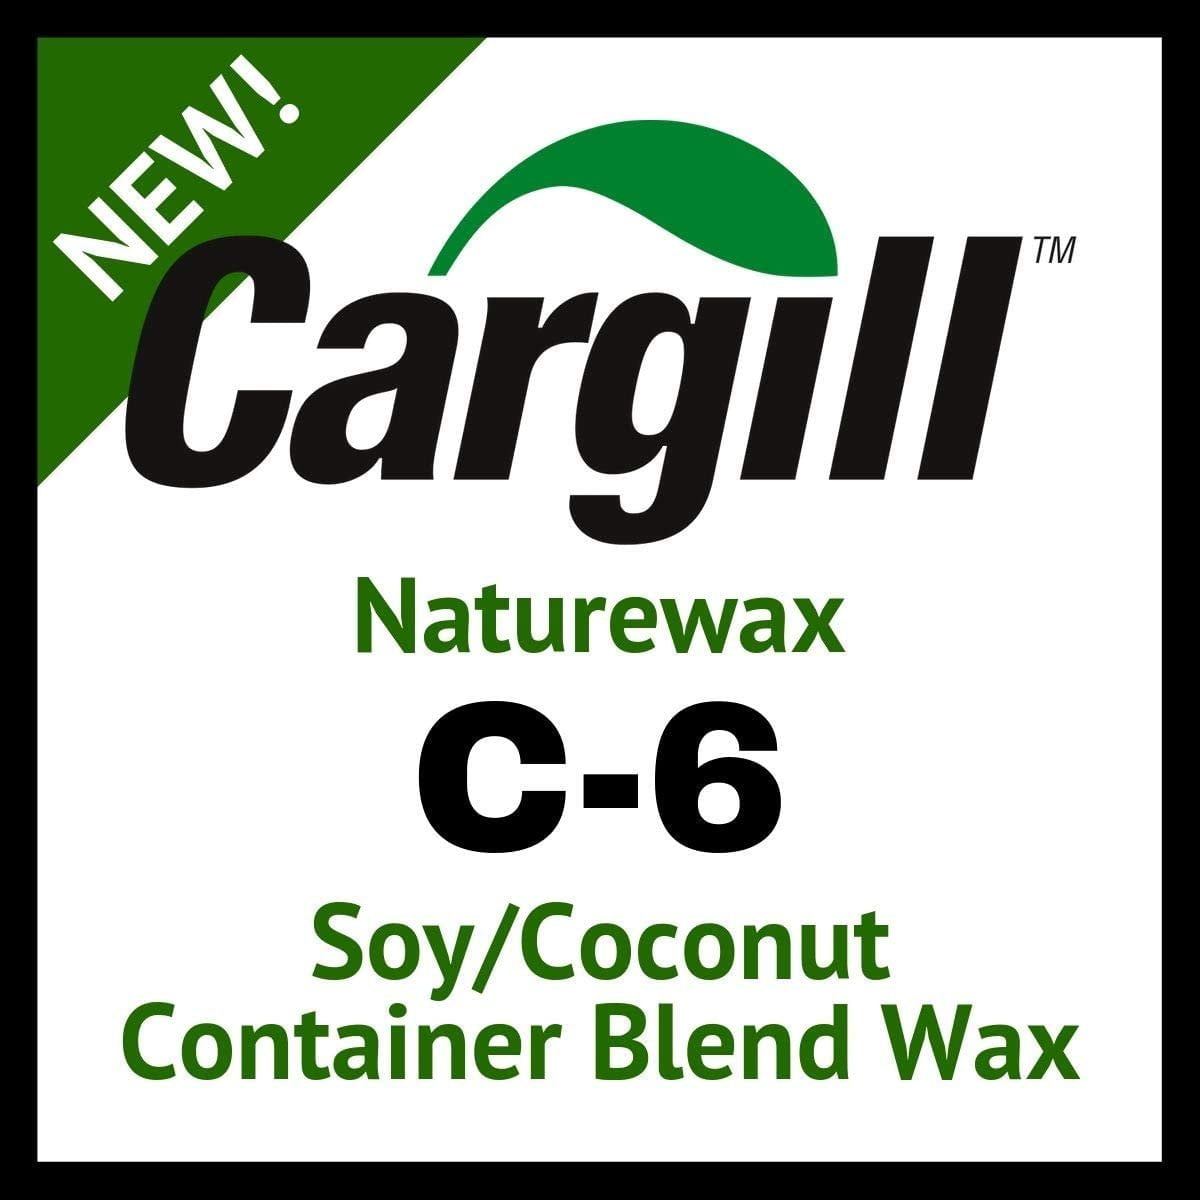 Lb Slab NatureWax C-6 Coconut Soy Container Wax 10 